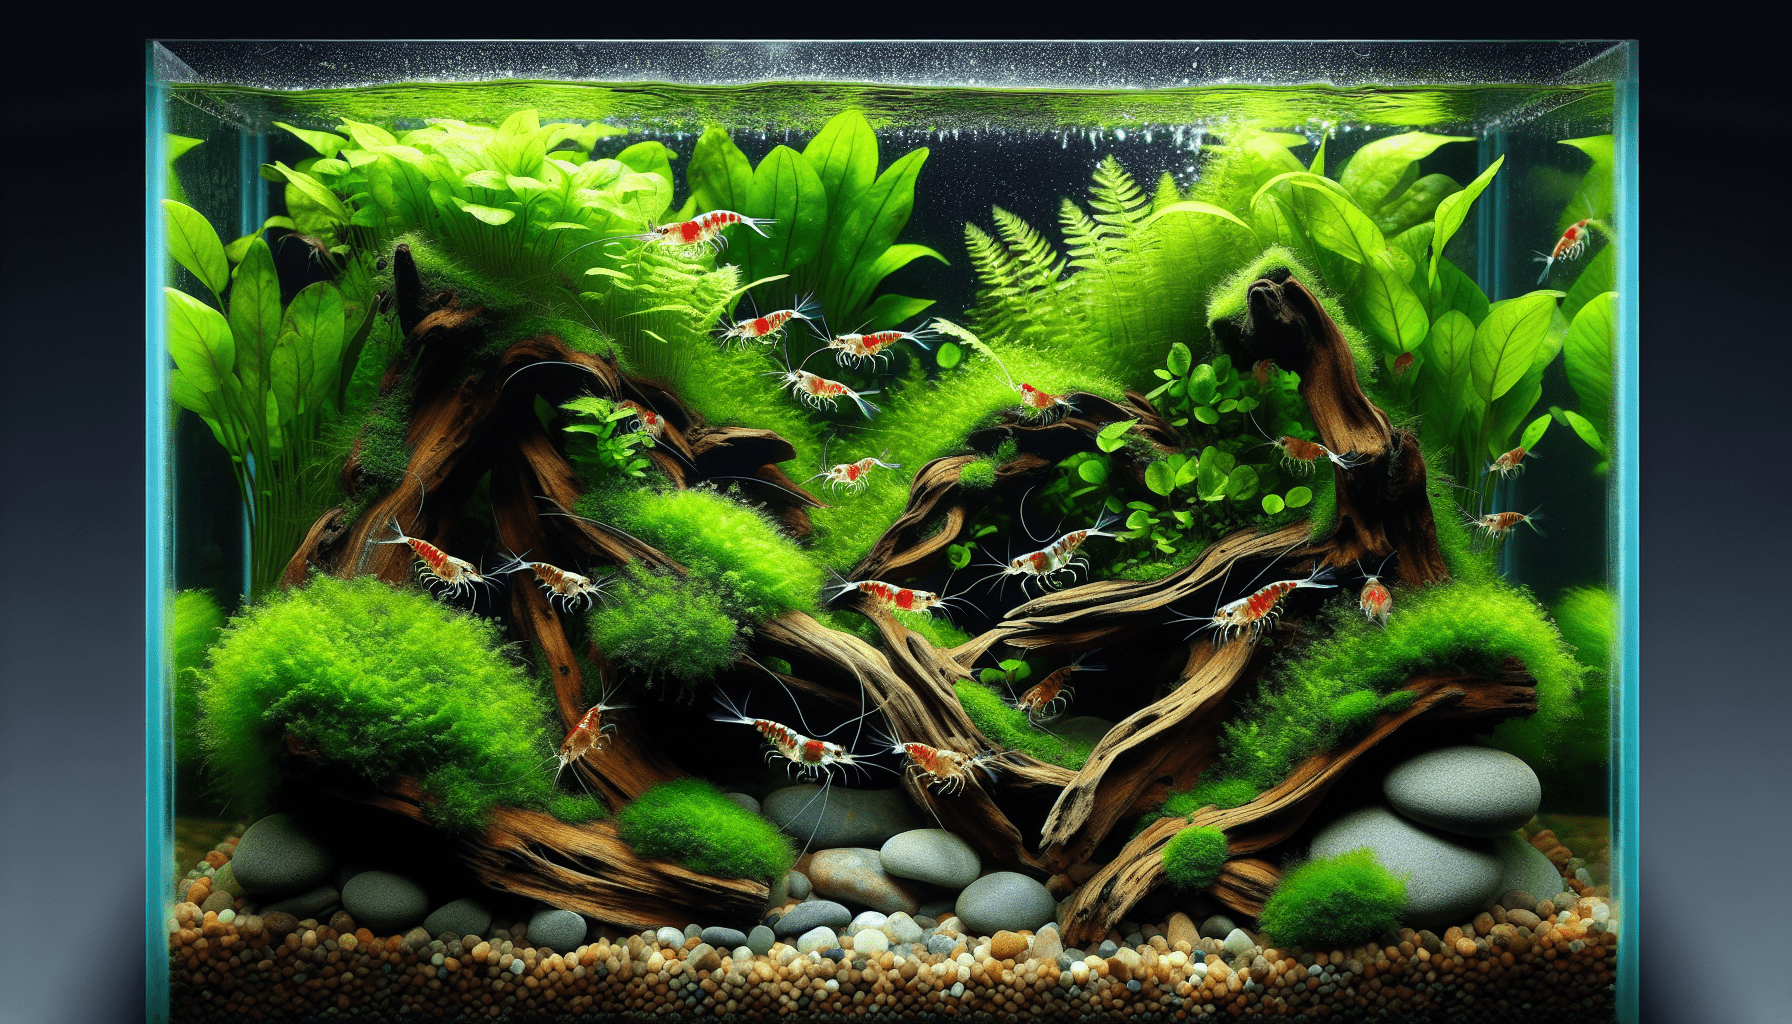 The Ultimate Guide to Aquascaping in a 5 Gallon Tank